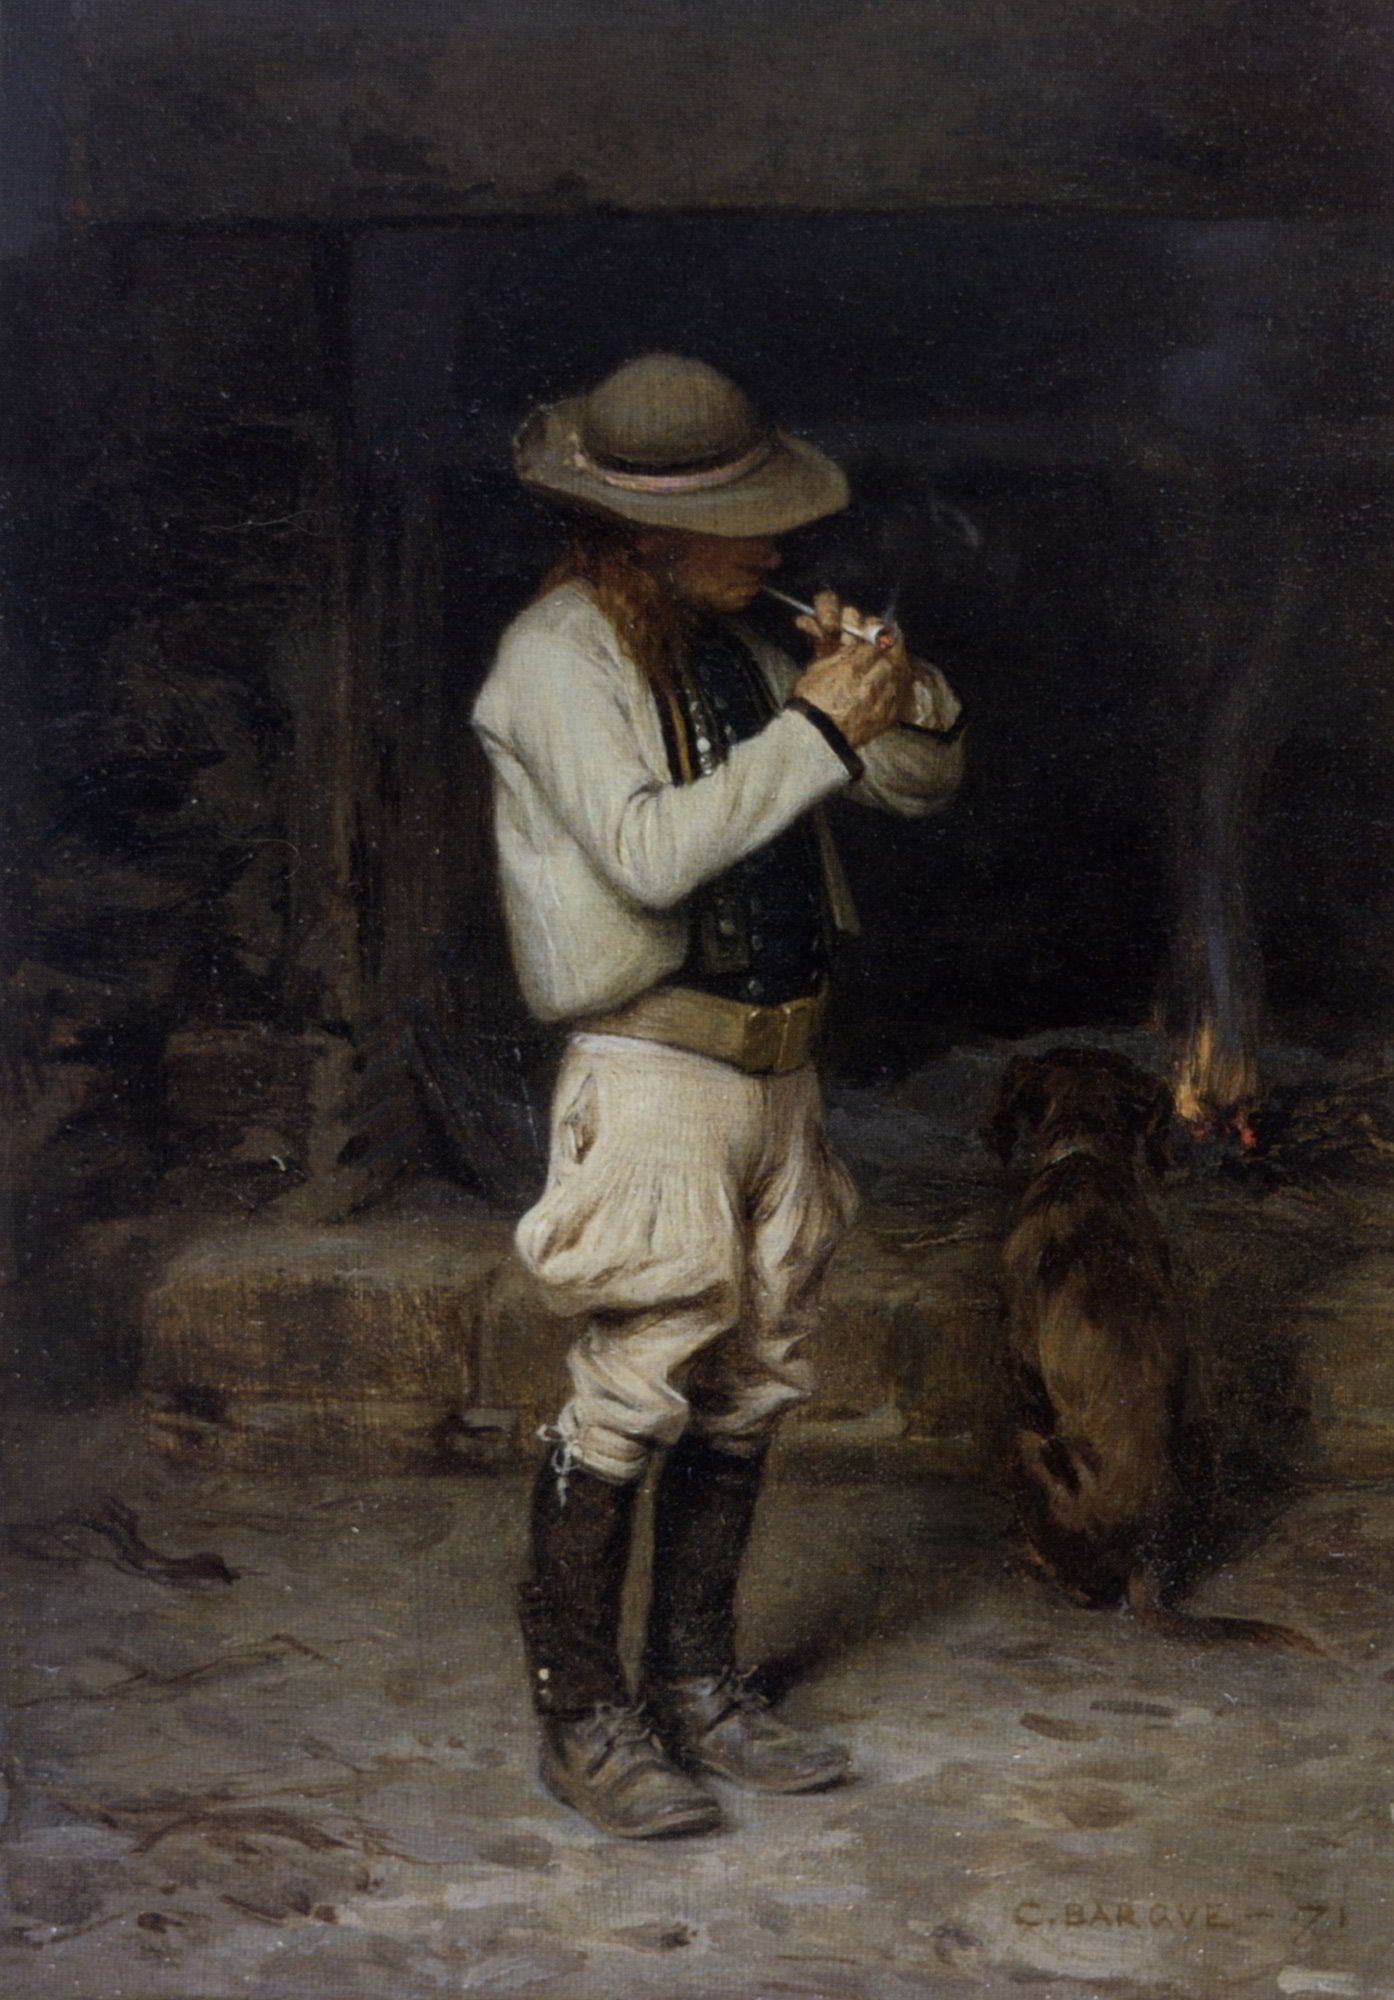 The Smoker by Charles Bargue